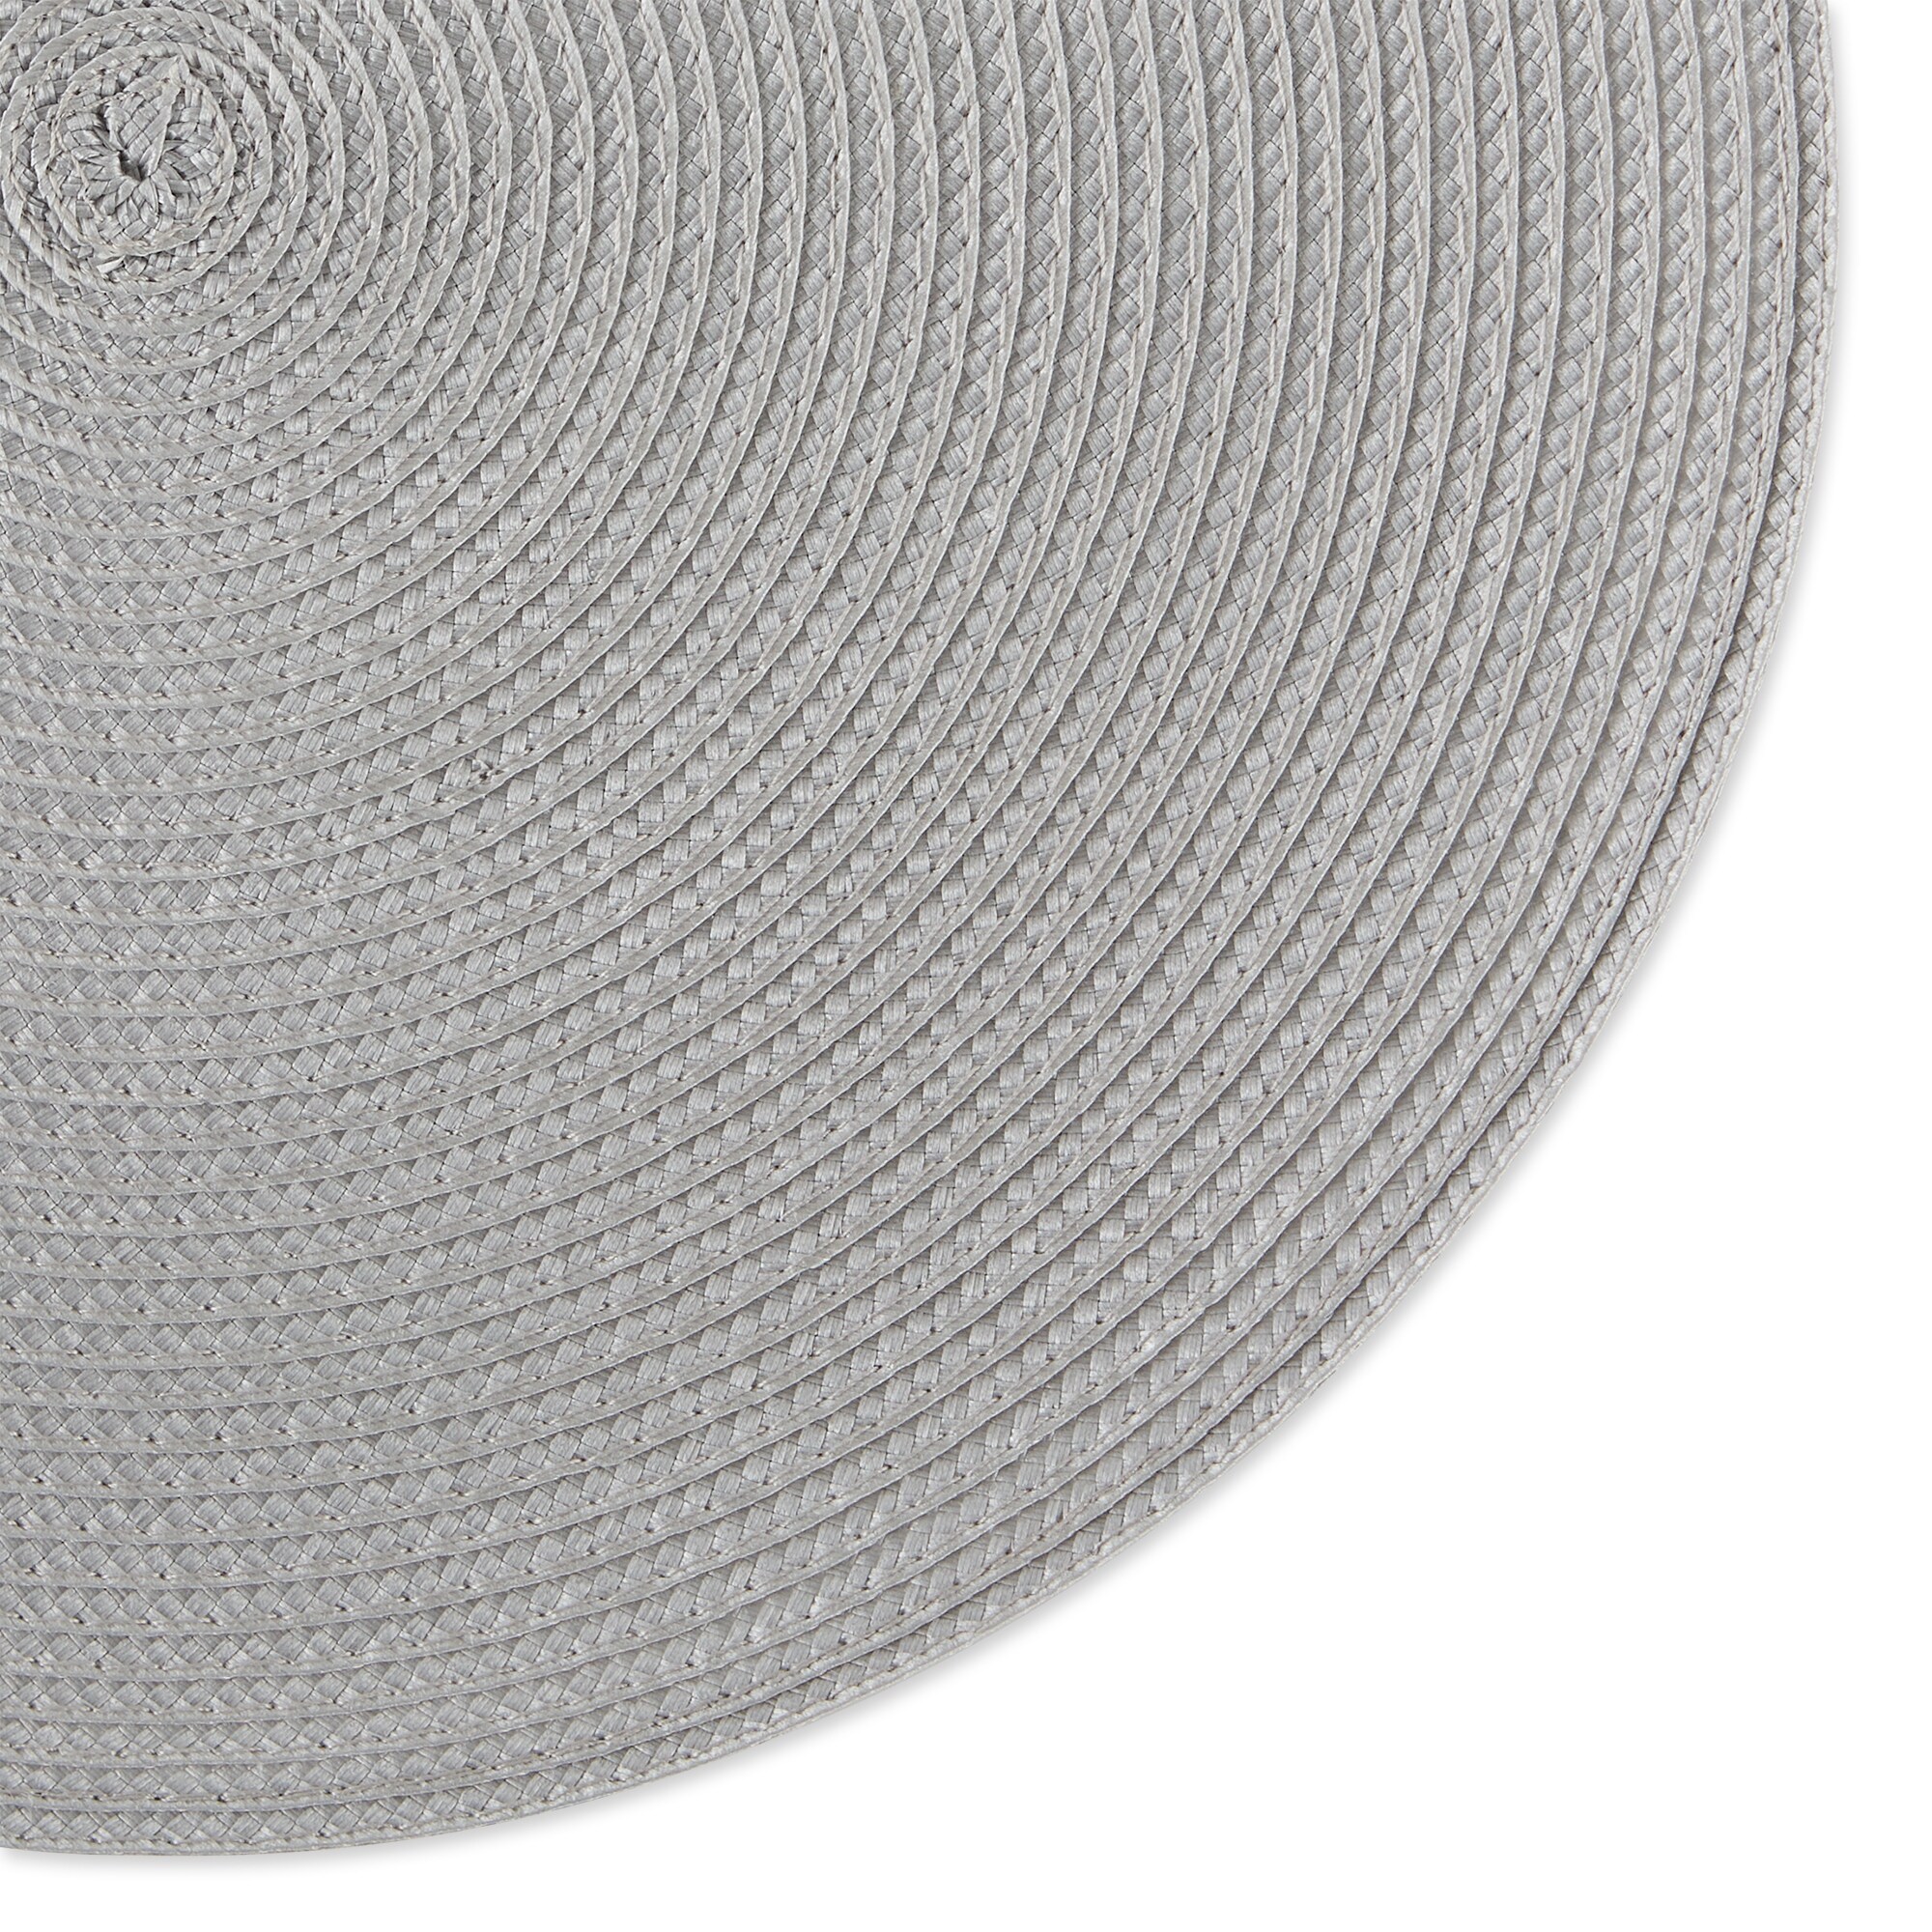 https://ak1.ostkcdn.com/images/products/is/images/direct/1fd5ef4400865ec4499f2d5448e549a8d8801191/DII-White-Round-PP-Woven-Placemat-Set-of-6.jpg